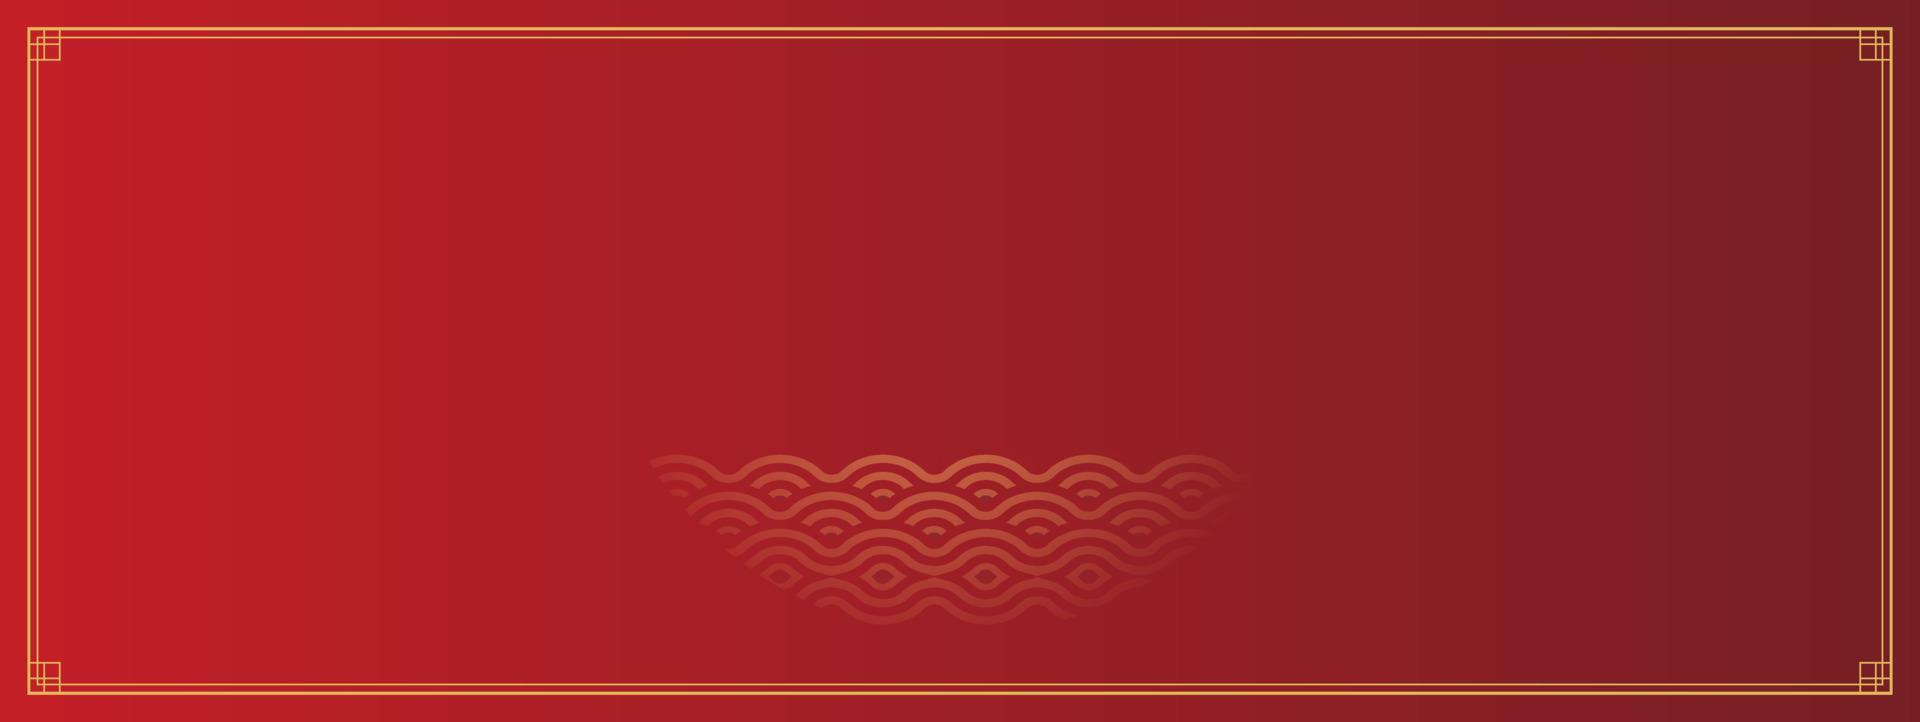 Horizontal Banner Red Background Colour. Chinese New Year Elements vector